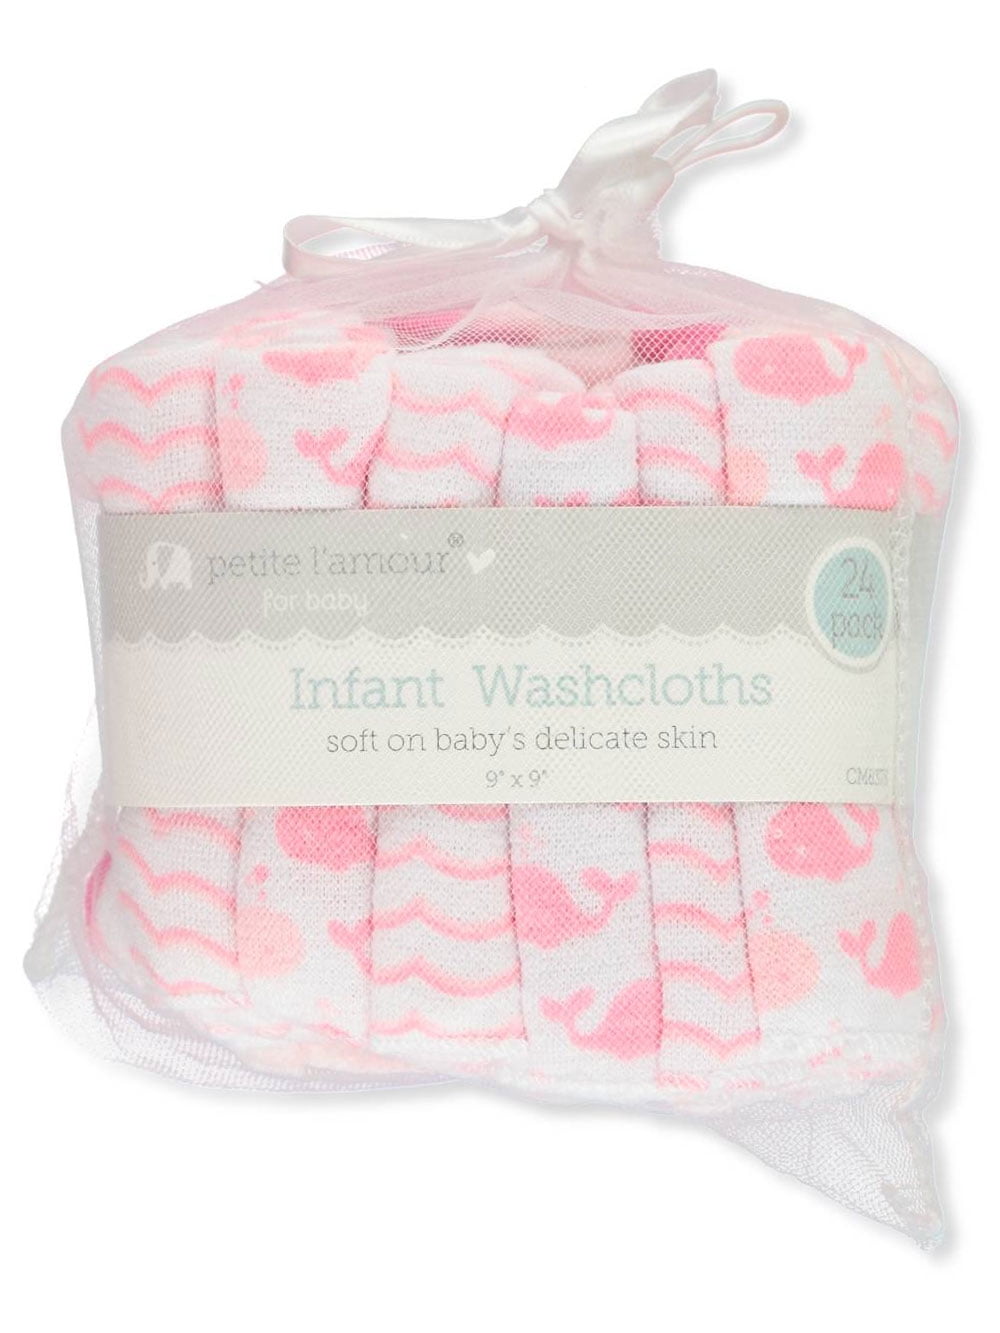 Baby Washcloths — Everything you need to know! - My Little Love Heart